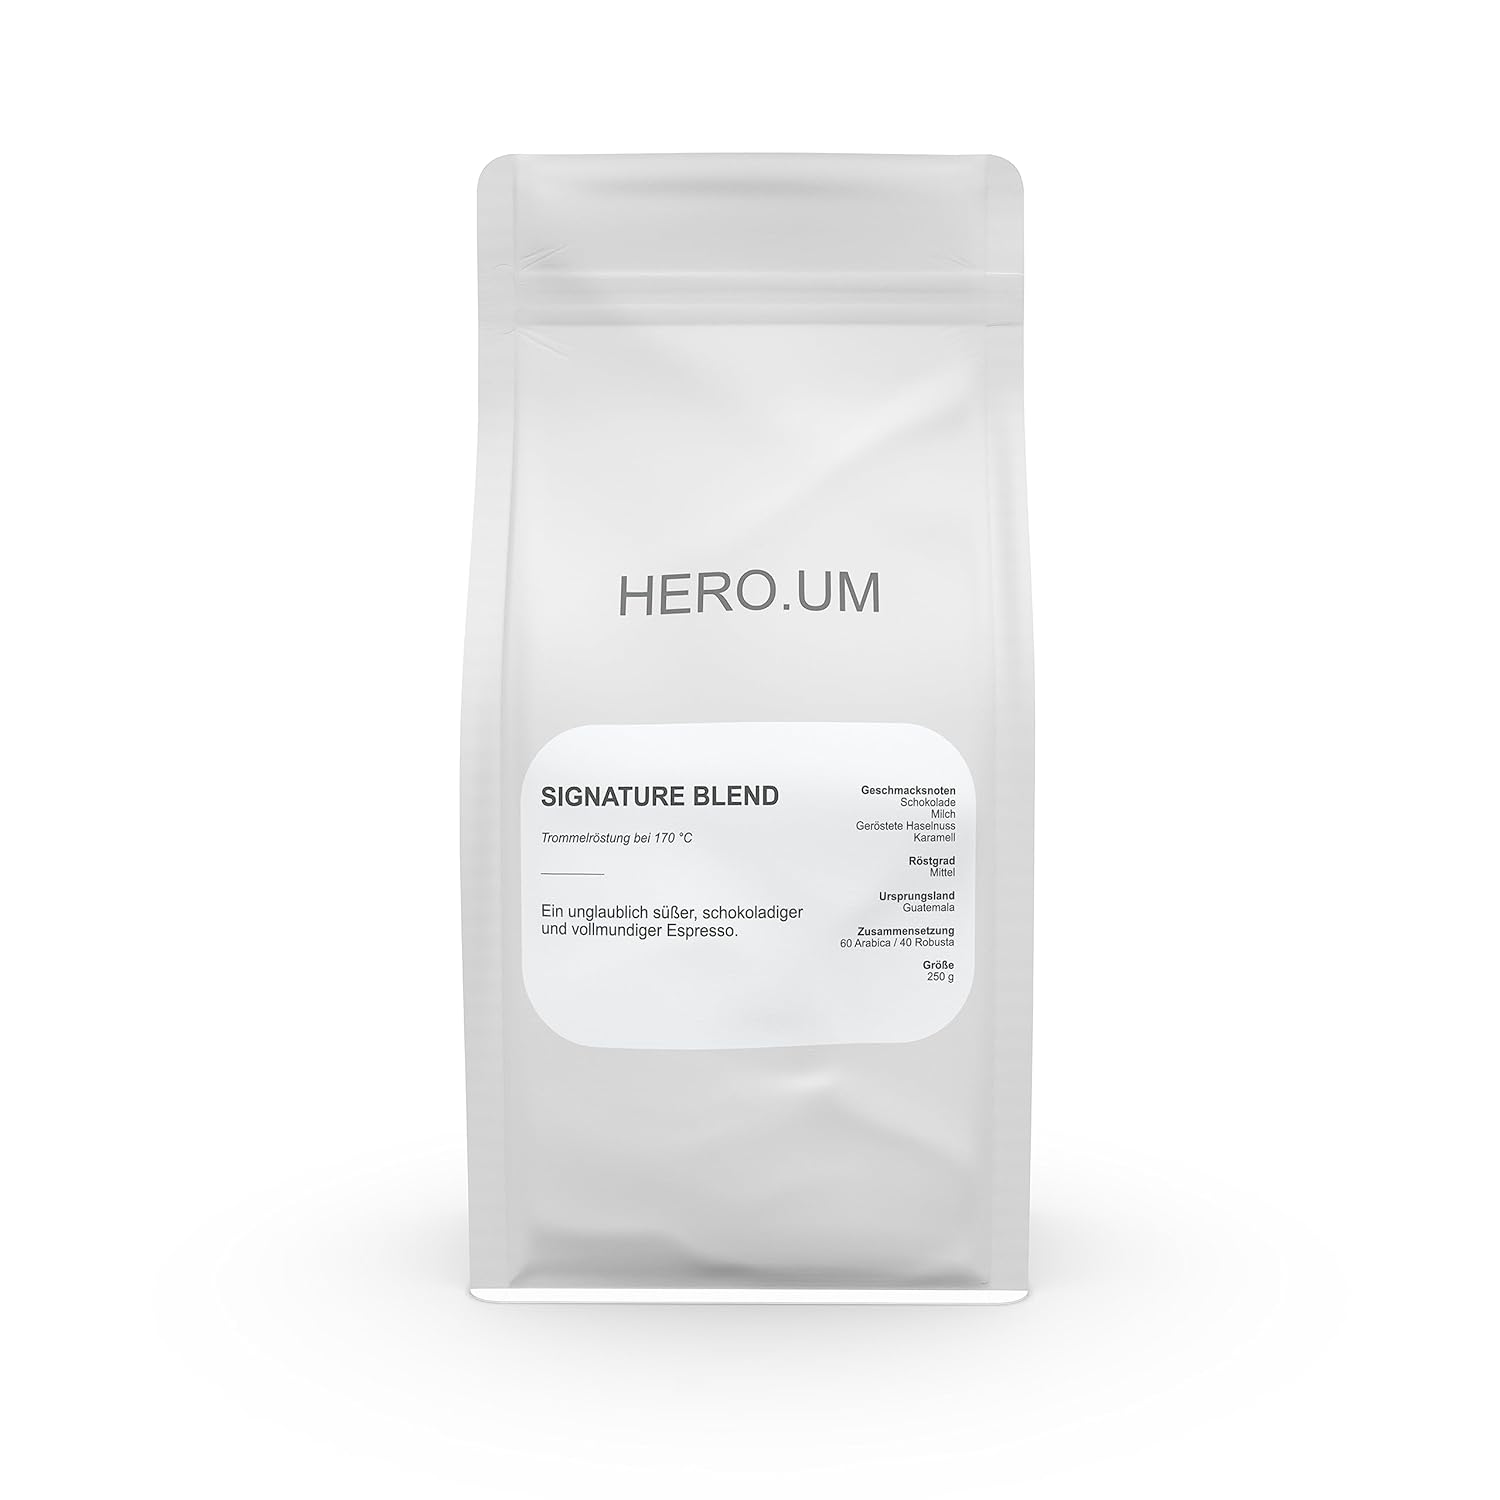 Hero.um | Signature blend | 250g | Medium roast | High quality and freshly roasted espresso beans from Guatemala for the perfect espresso enjoyment